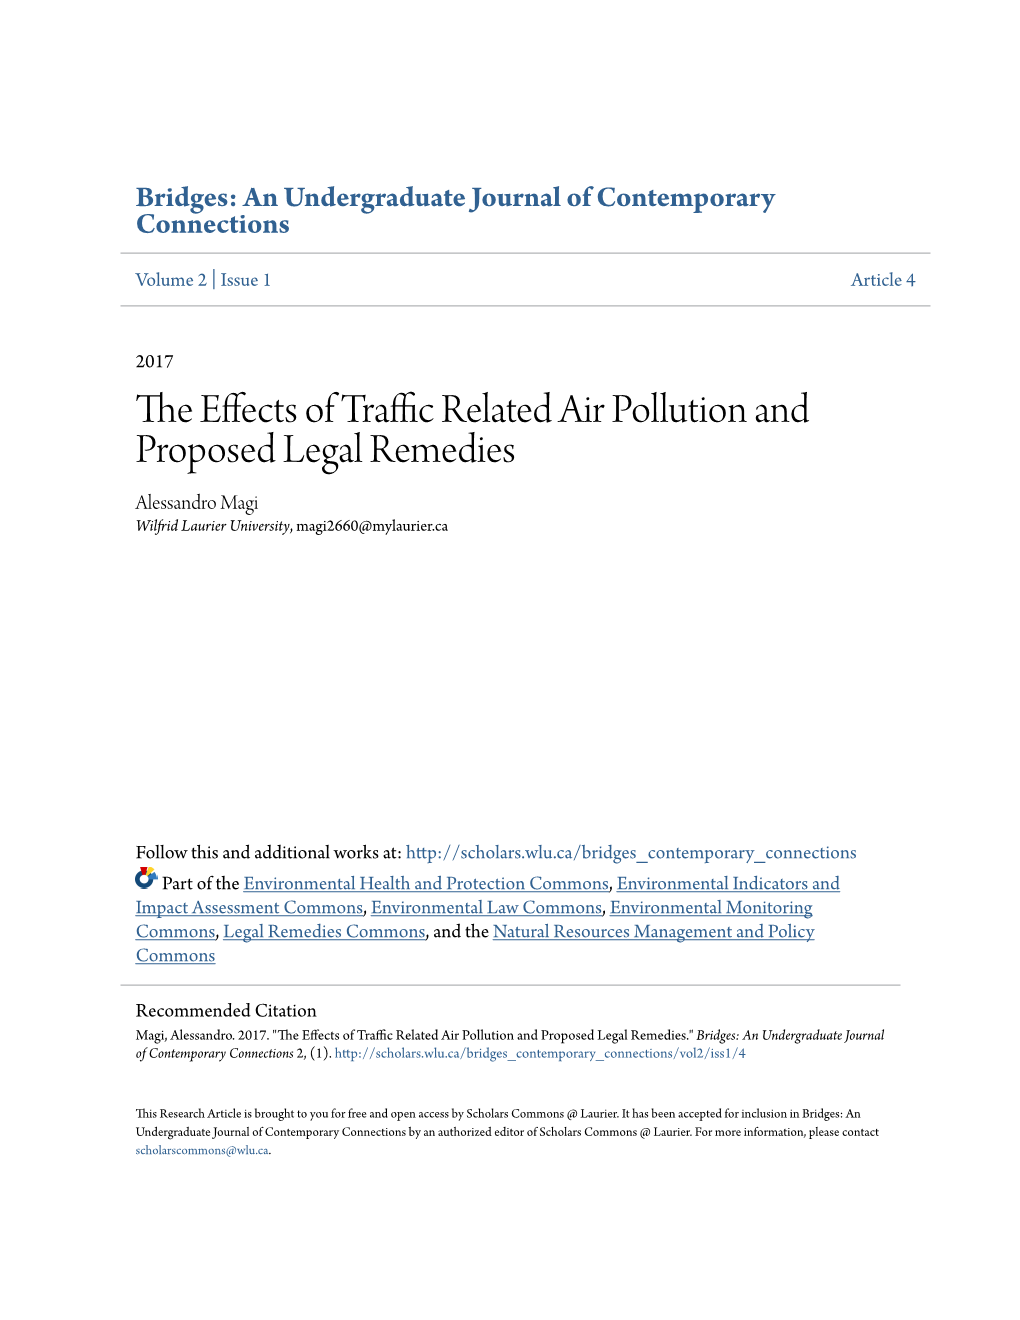 The Effects of Traffic Related Air Pollution and Proposed Legal Remedies." Bridges: an Undergraduate Journal of Contemporary Connections 2, (1)